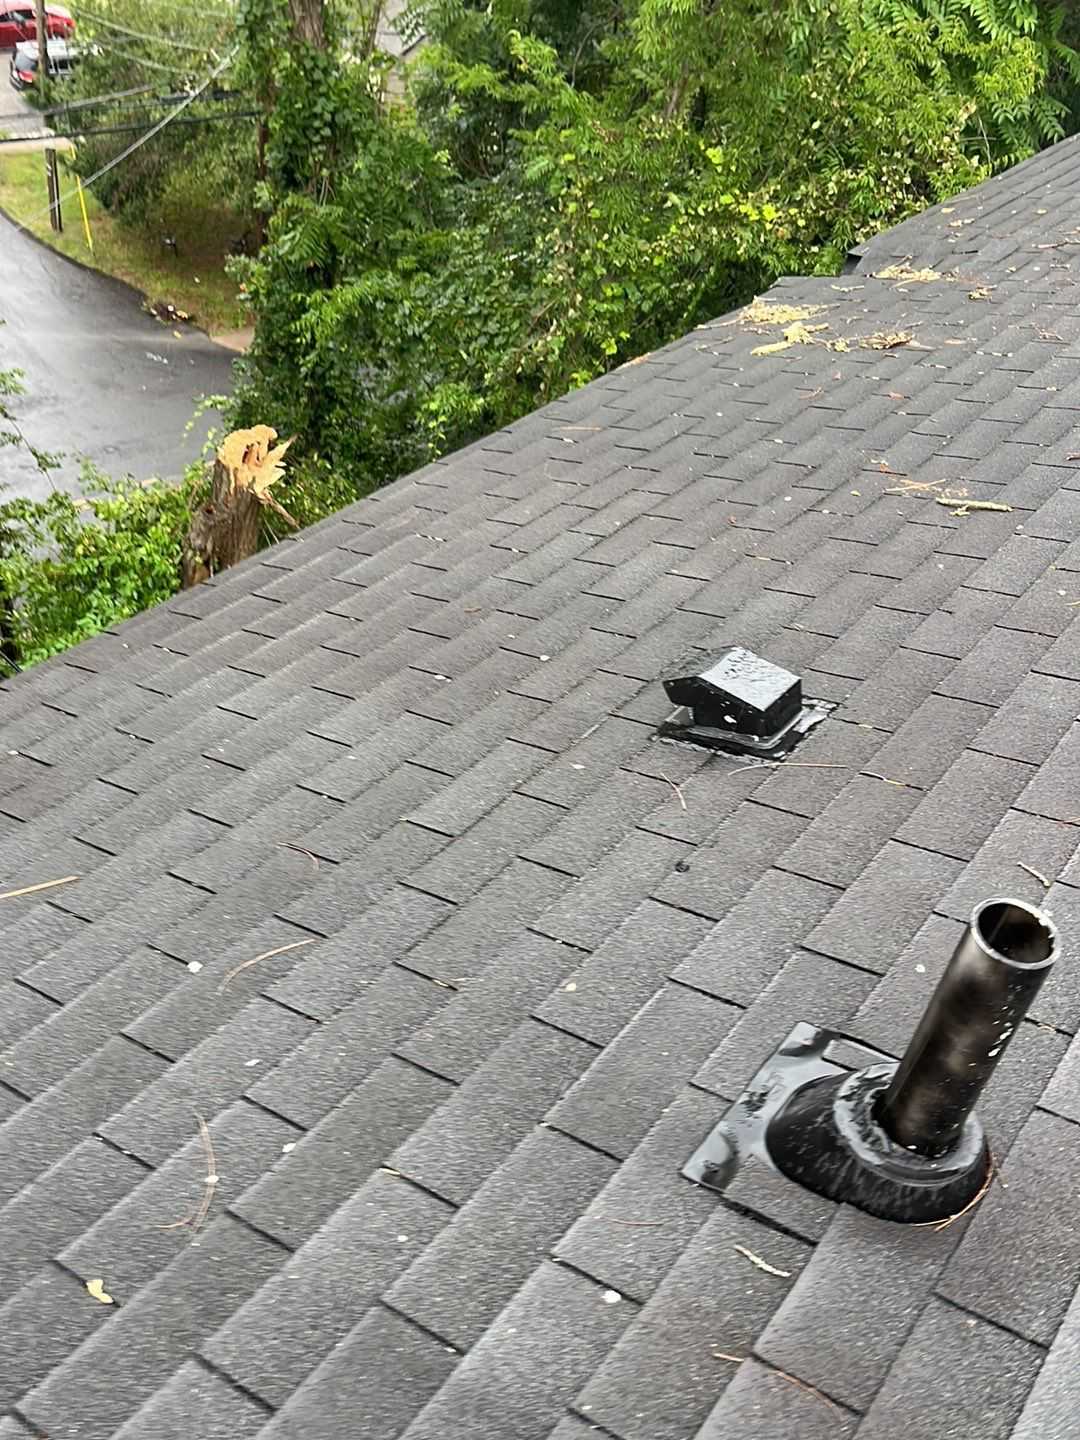 Tree damage, hole in roof, and missing shingles.